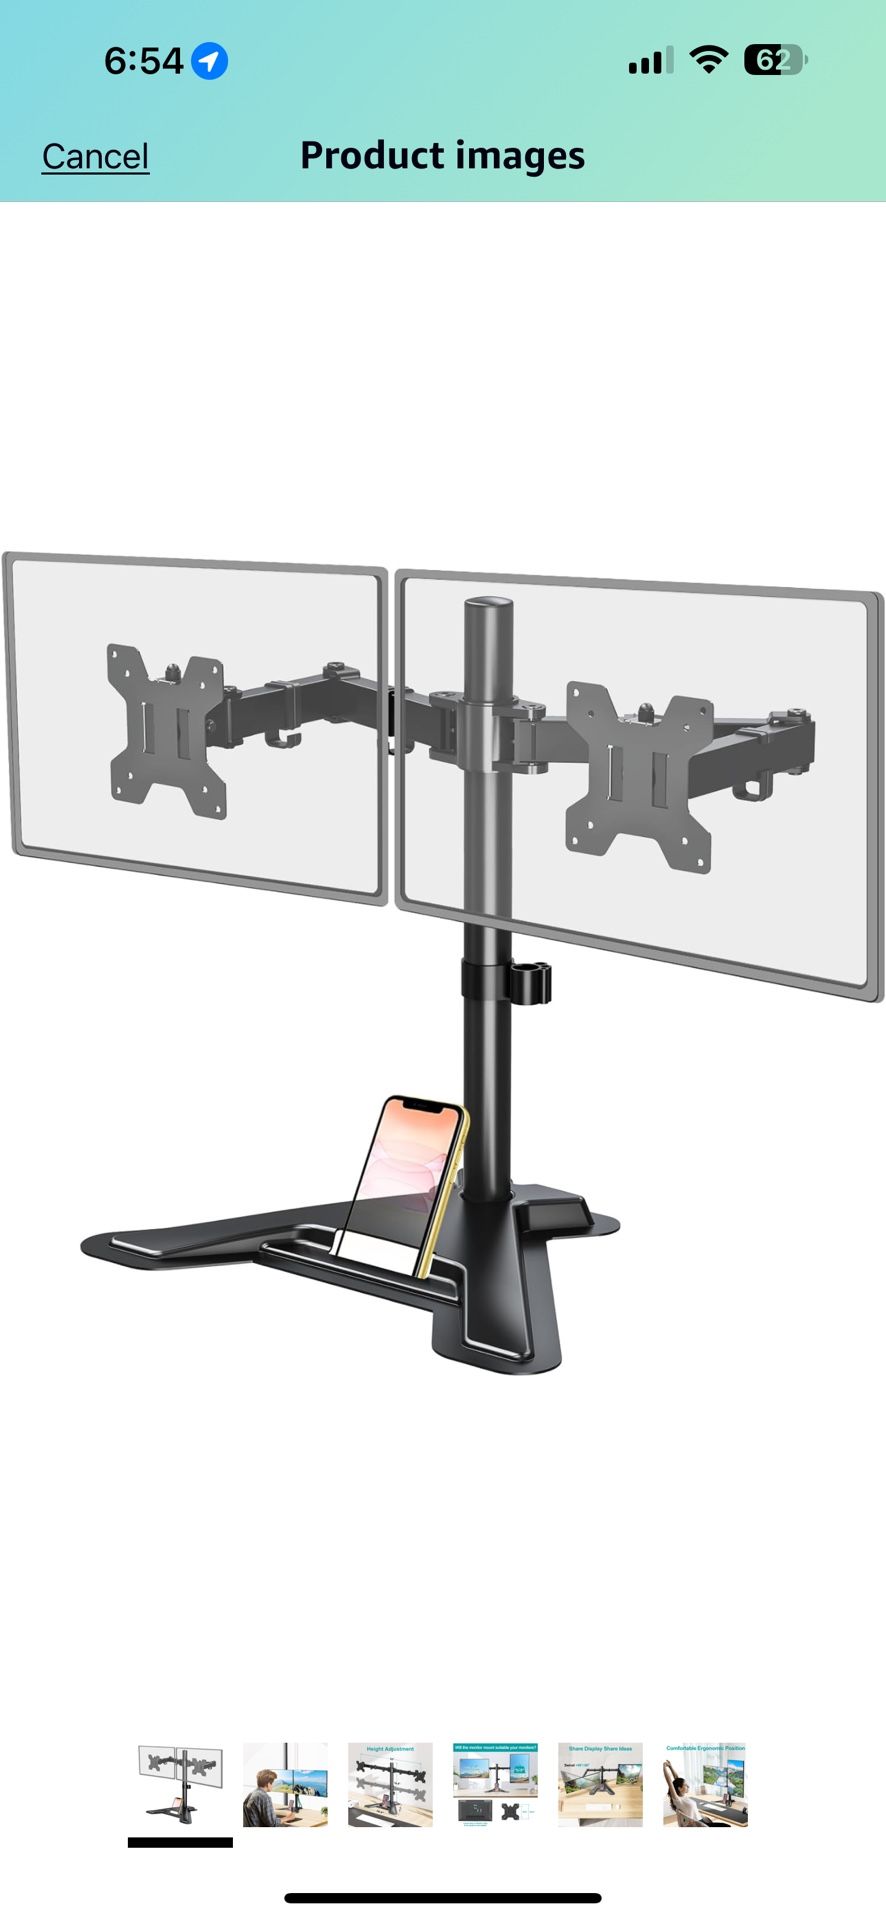 MOUNT PRO Dual Monitor Stand - Free Standing Full Motion Monitor Desk Mount Fits 2 Screens up to 27 inches